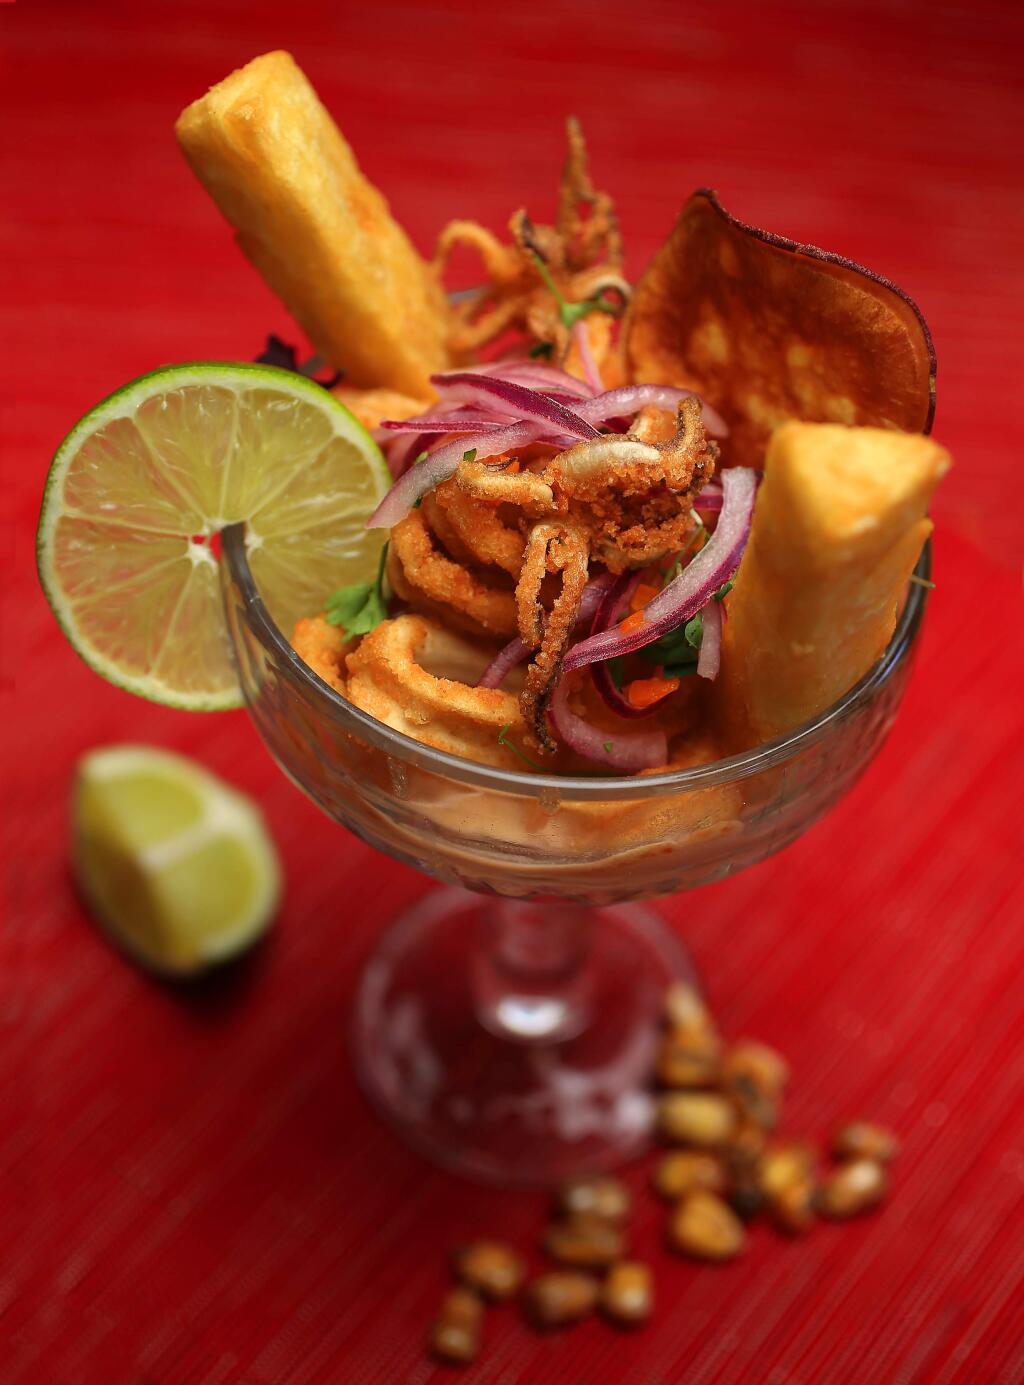 Ceviche de Leche de Tigre con Jalea with fried calamari, tilapia ceviche with ginger, garlic, celery and pickled onion served with fried yuca from chef/owner Jose Navarro of Sazon Peruvian Cuisine in Santa Rosa. (photo by John Burgess/The Press Democrat)